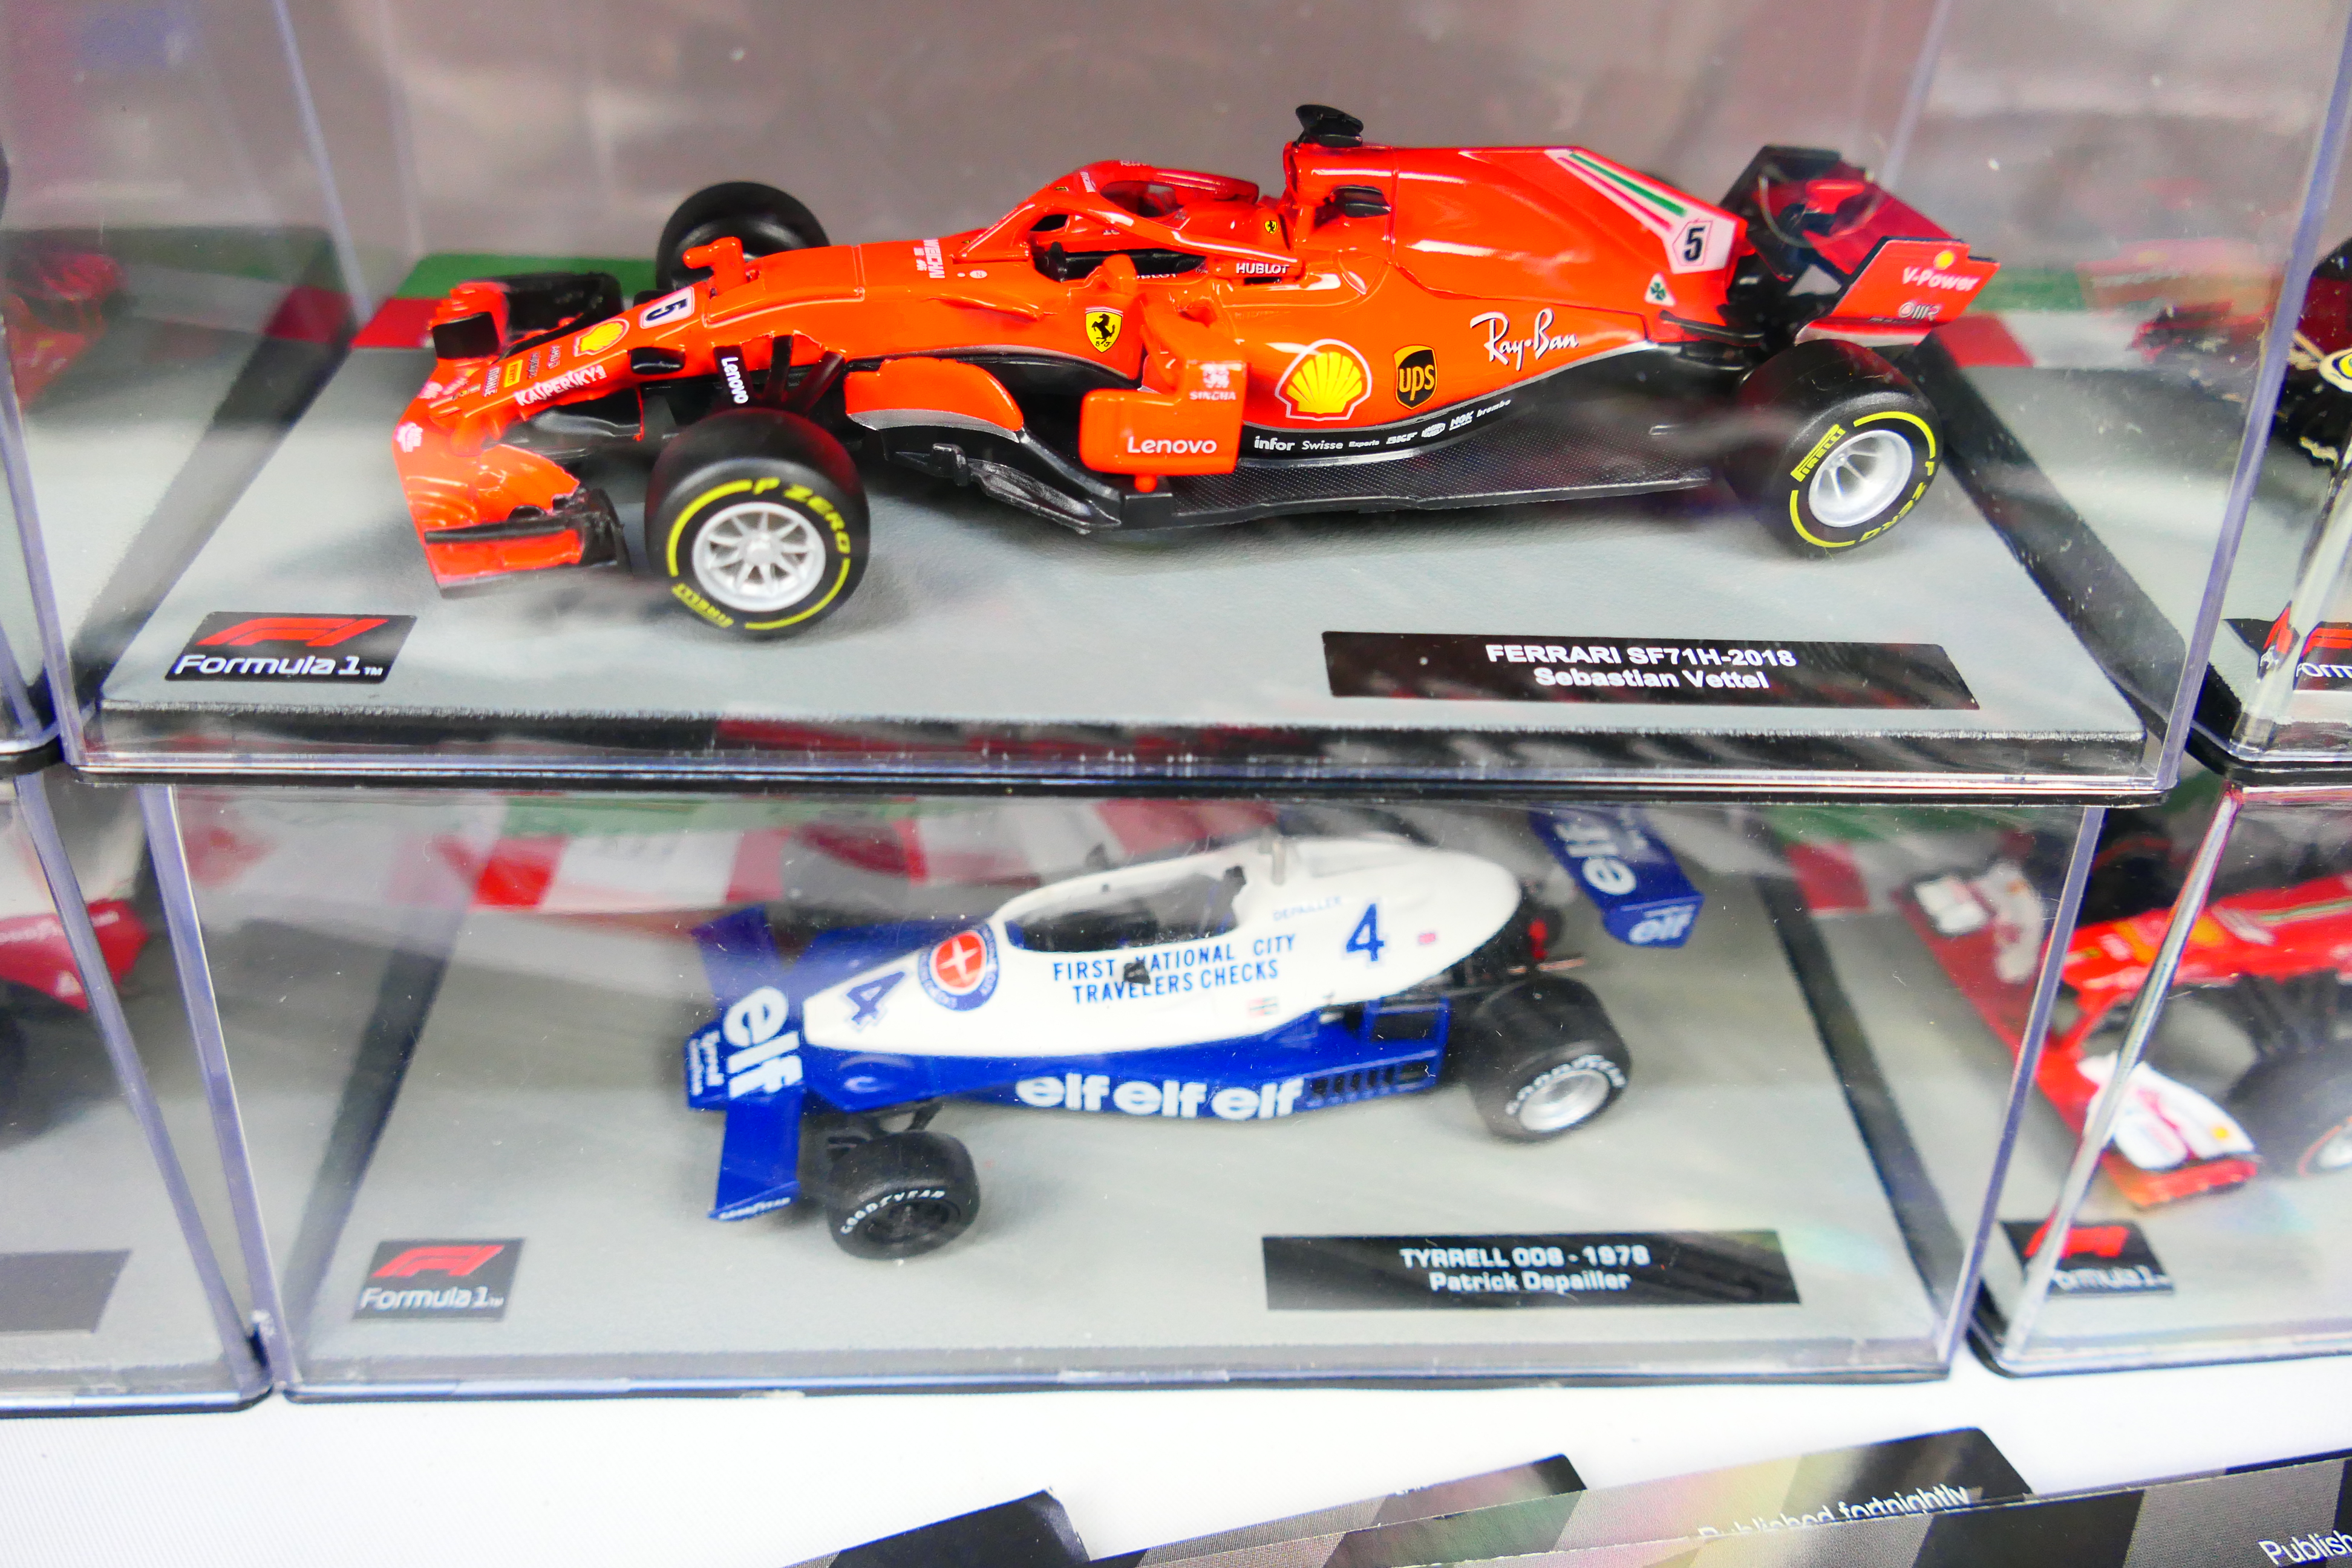 Centauria - Panini - Formula 1 - 35 x models from Formula 1 The Car Collection with the cars and - Image 14 of 14